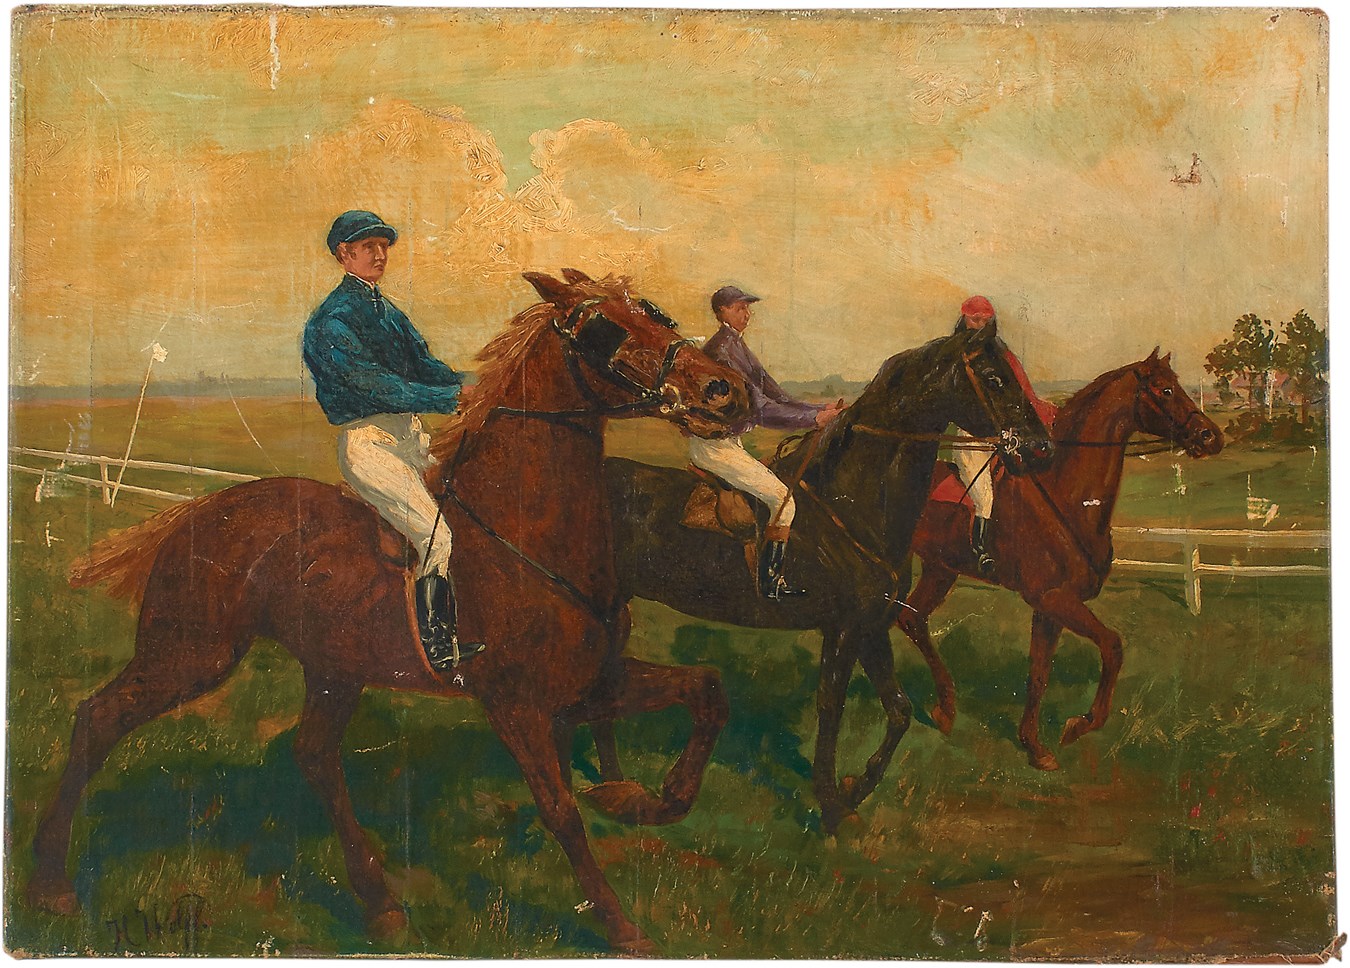 Horse Racing - The Three Dominant Jockeys of the 19th Century Oil on Canvas by H. Wolff - Fred Archer, George Fordham & Nat Flatman